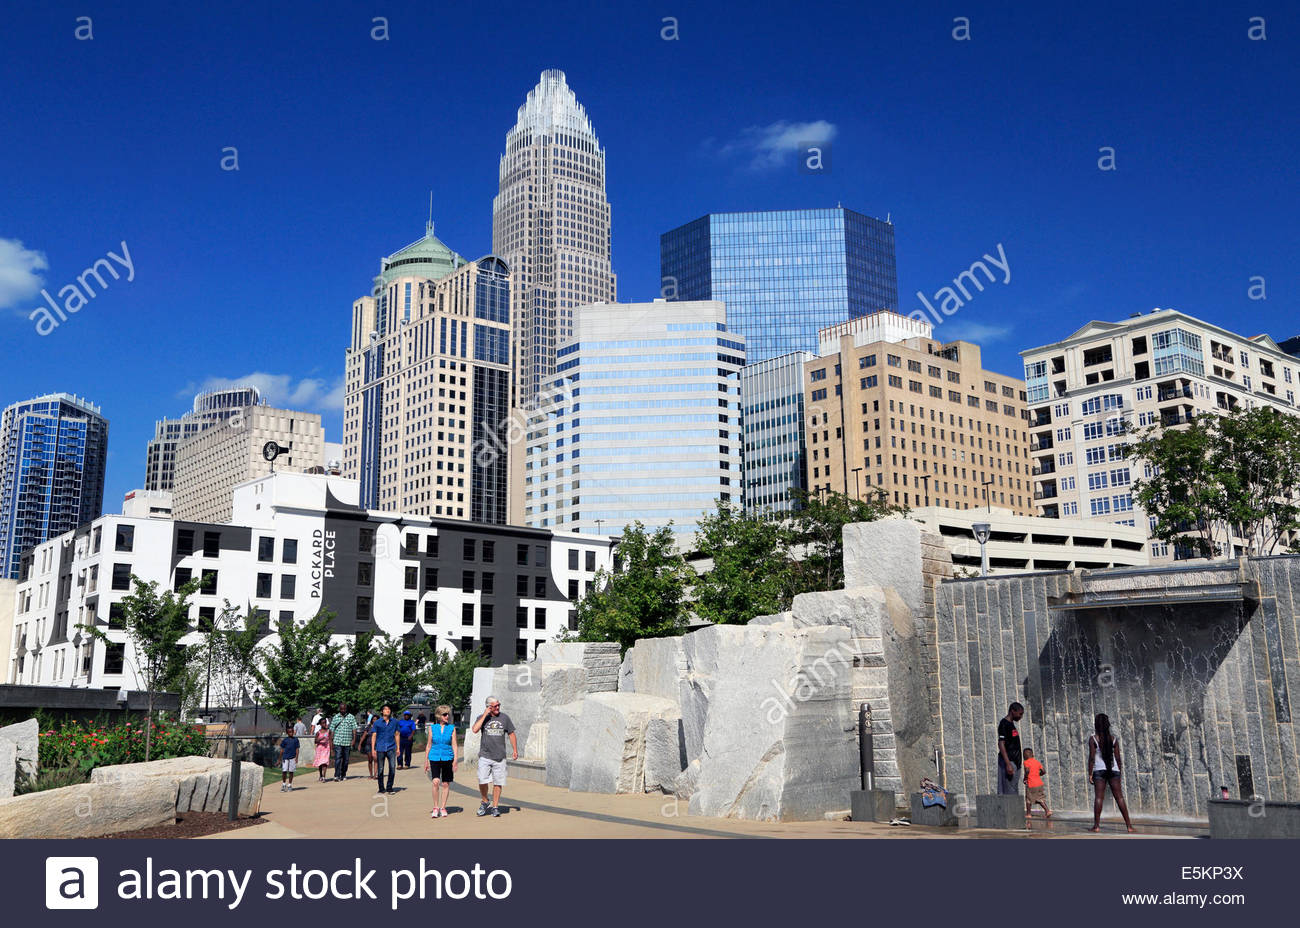 Charlotte North Carolina People In Romare Bearden Park With The